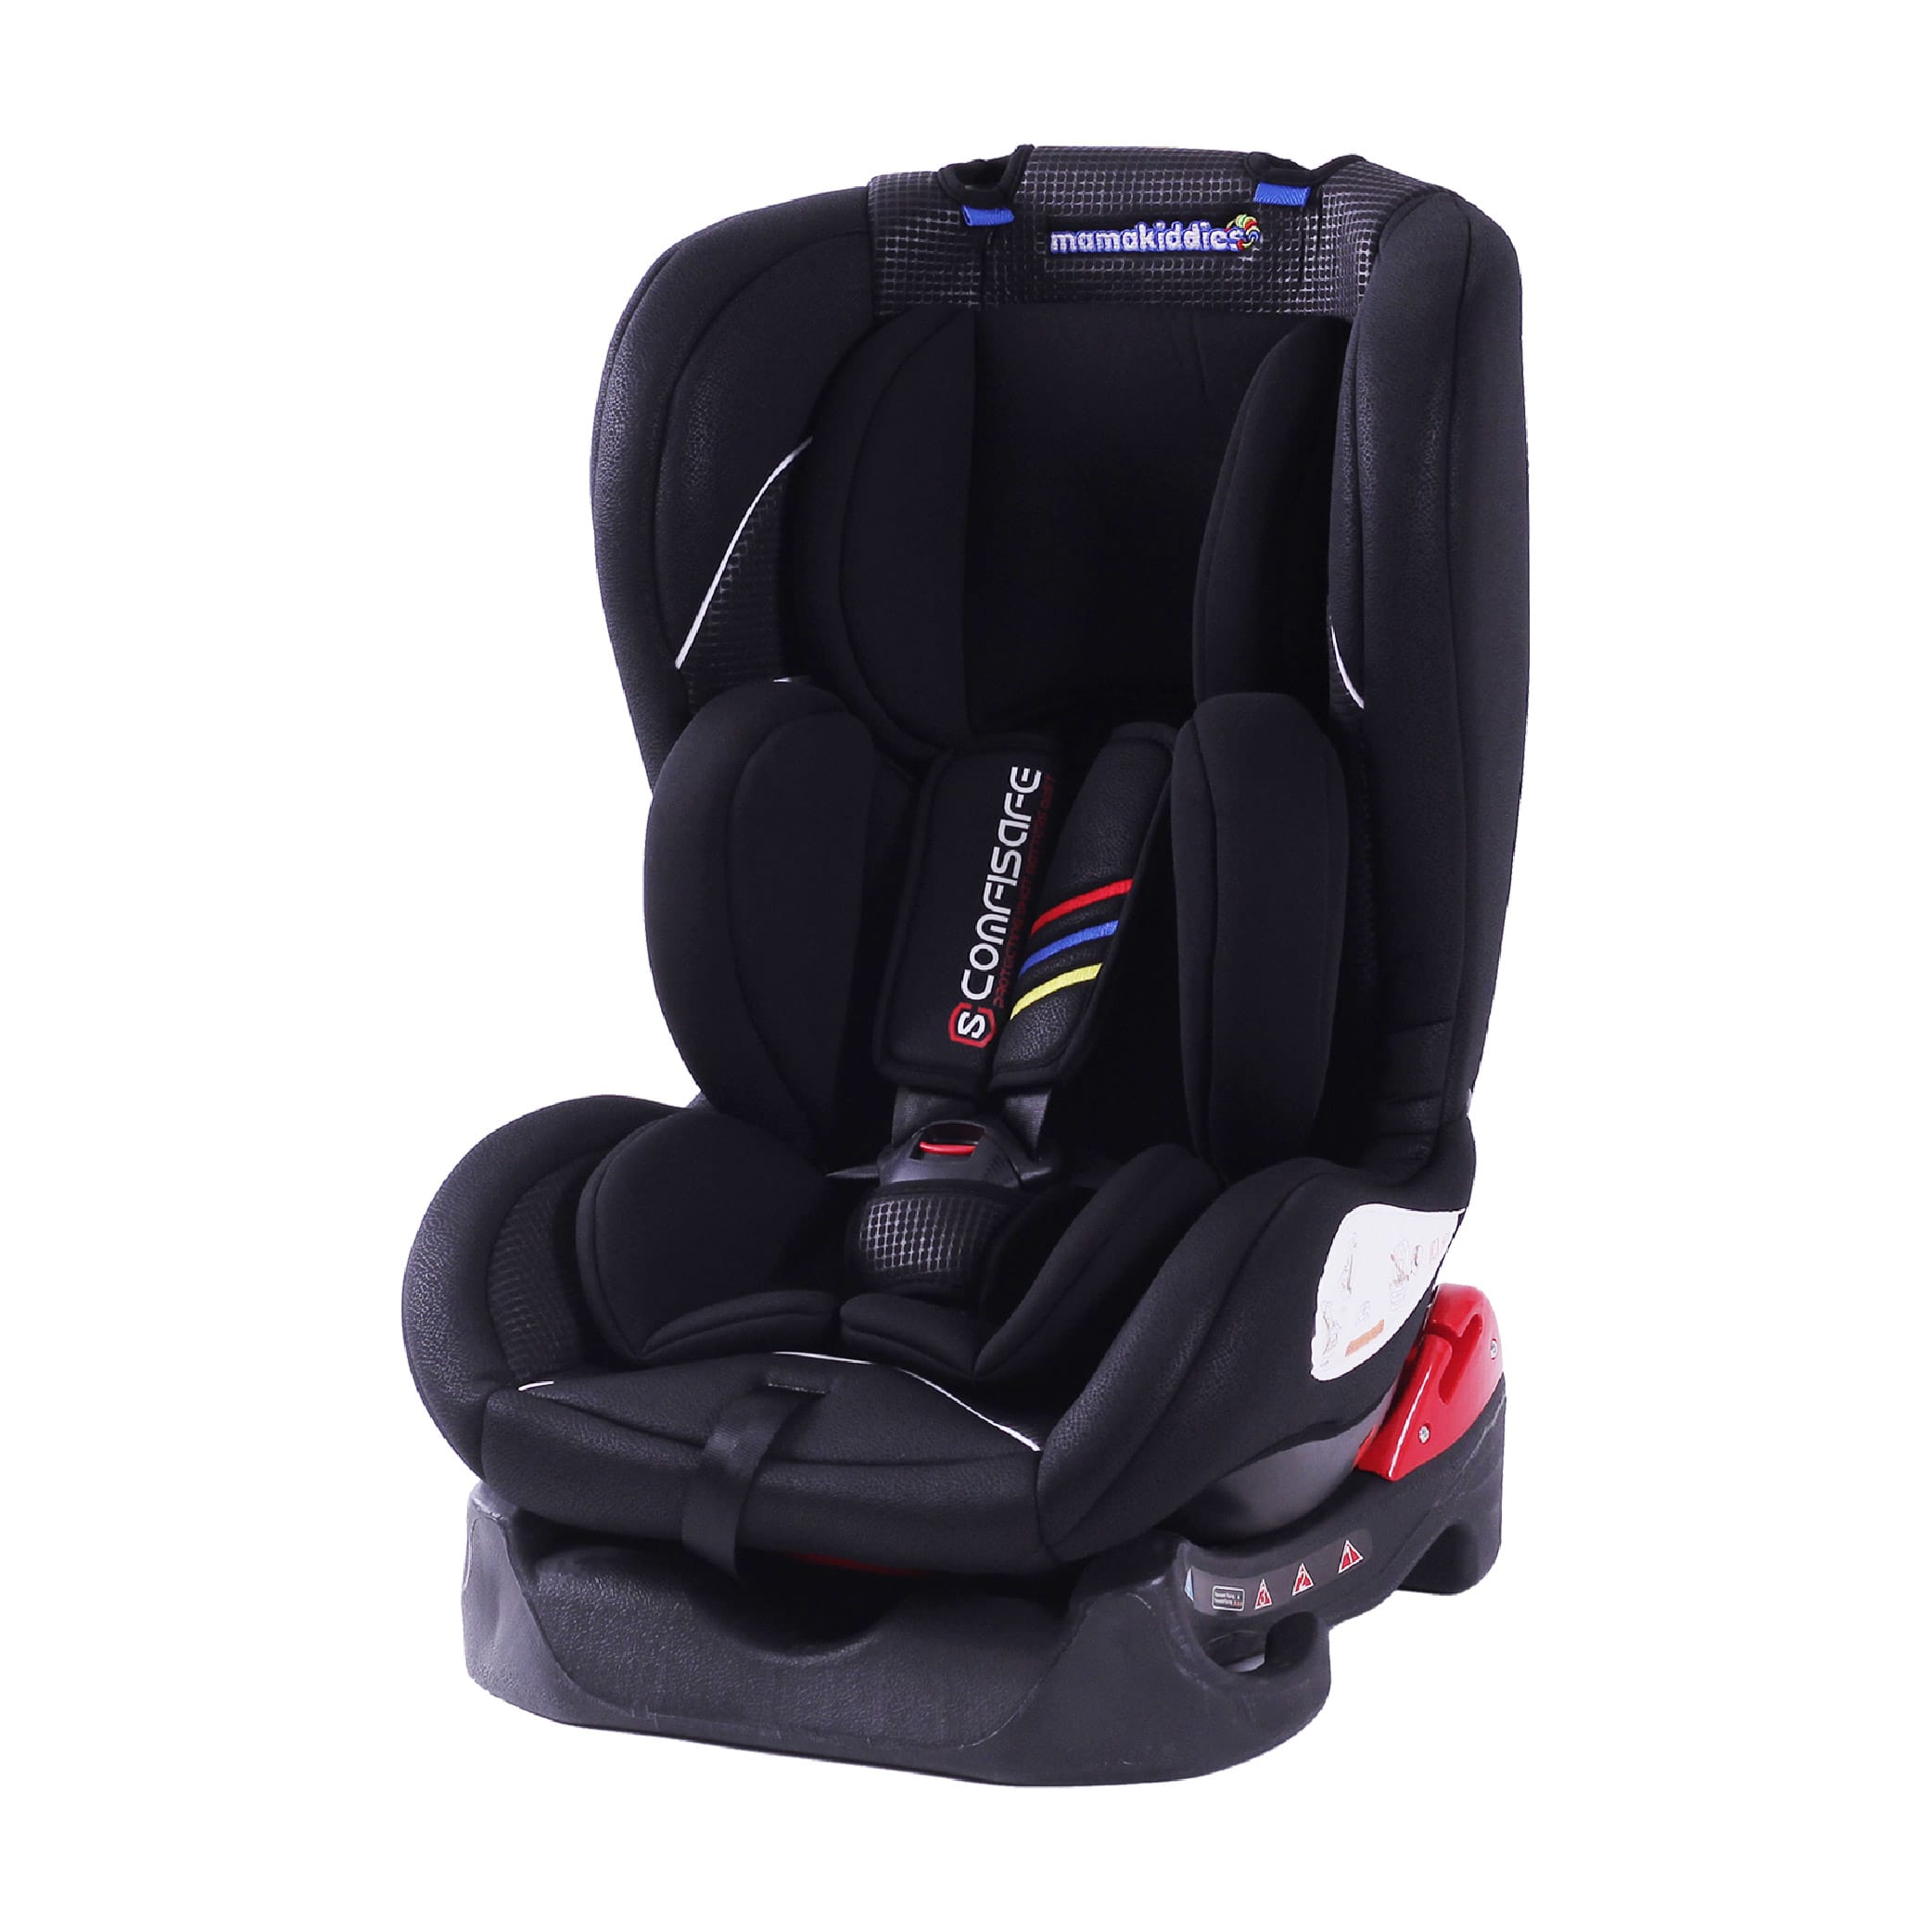 Mamakiddies Infant Baby Comfisafe Convertible Car Seat-1